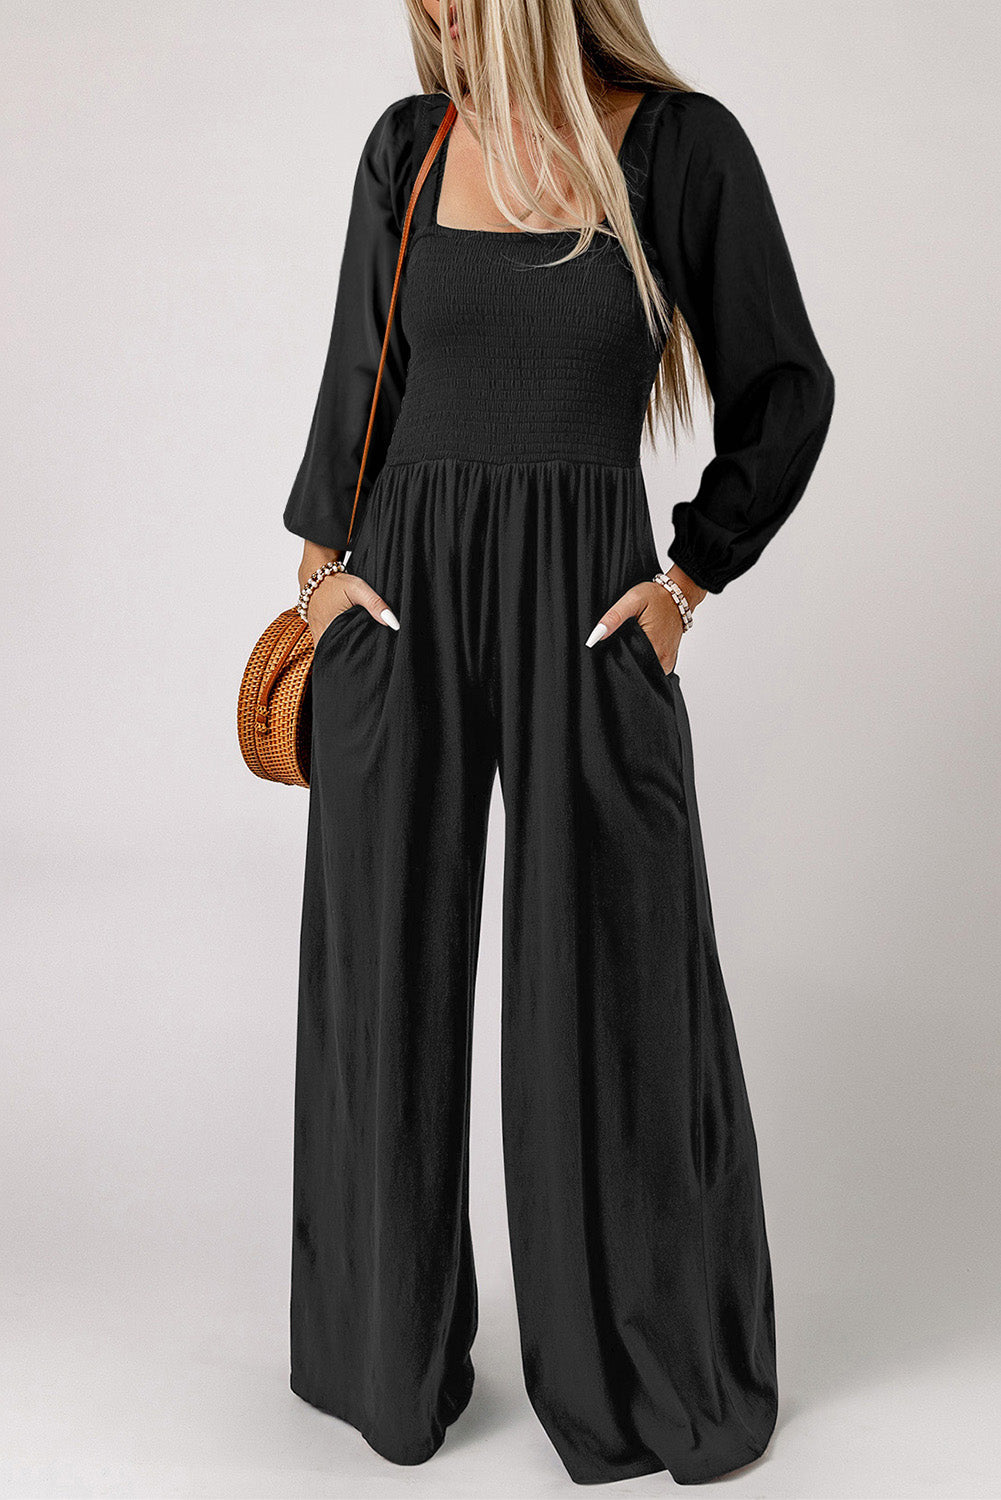 Square Neck Raglan Sleeve Jumpsuit with Pocket - Jumpsuit - Wild Willows Boutique - Massapequa, NY, affordable and fashionable clothing for women of all ages. Bottoms, tops, dresses, intimates, outerwear, sweater, shoes, accessories, jewelry, active wear, and more // Wild Willow Boutique.